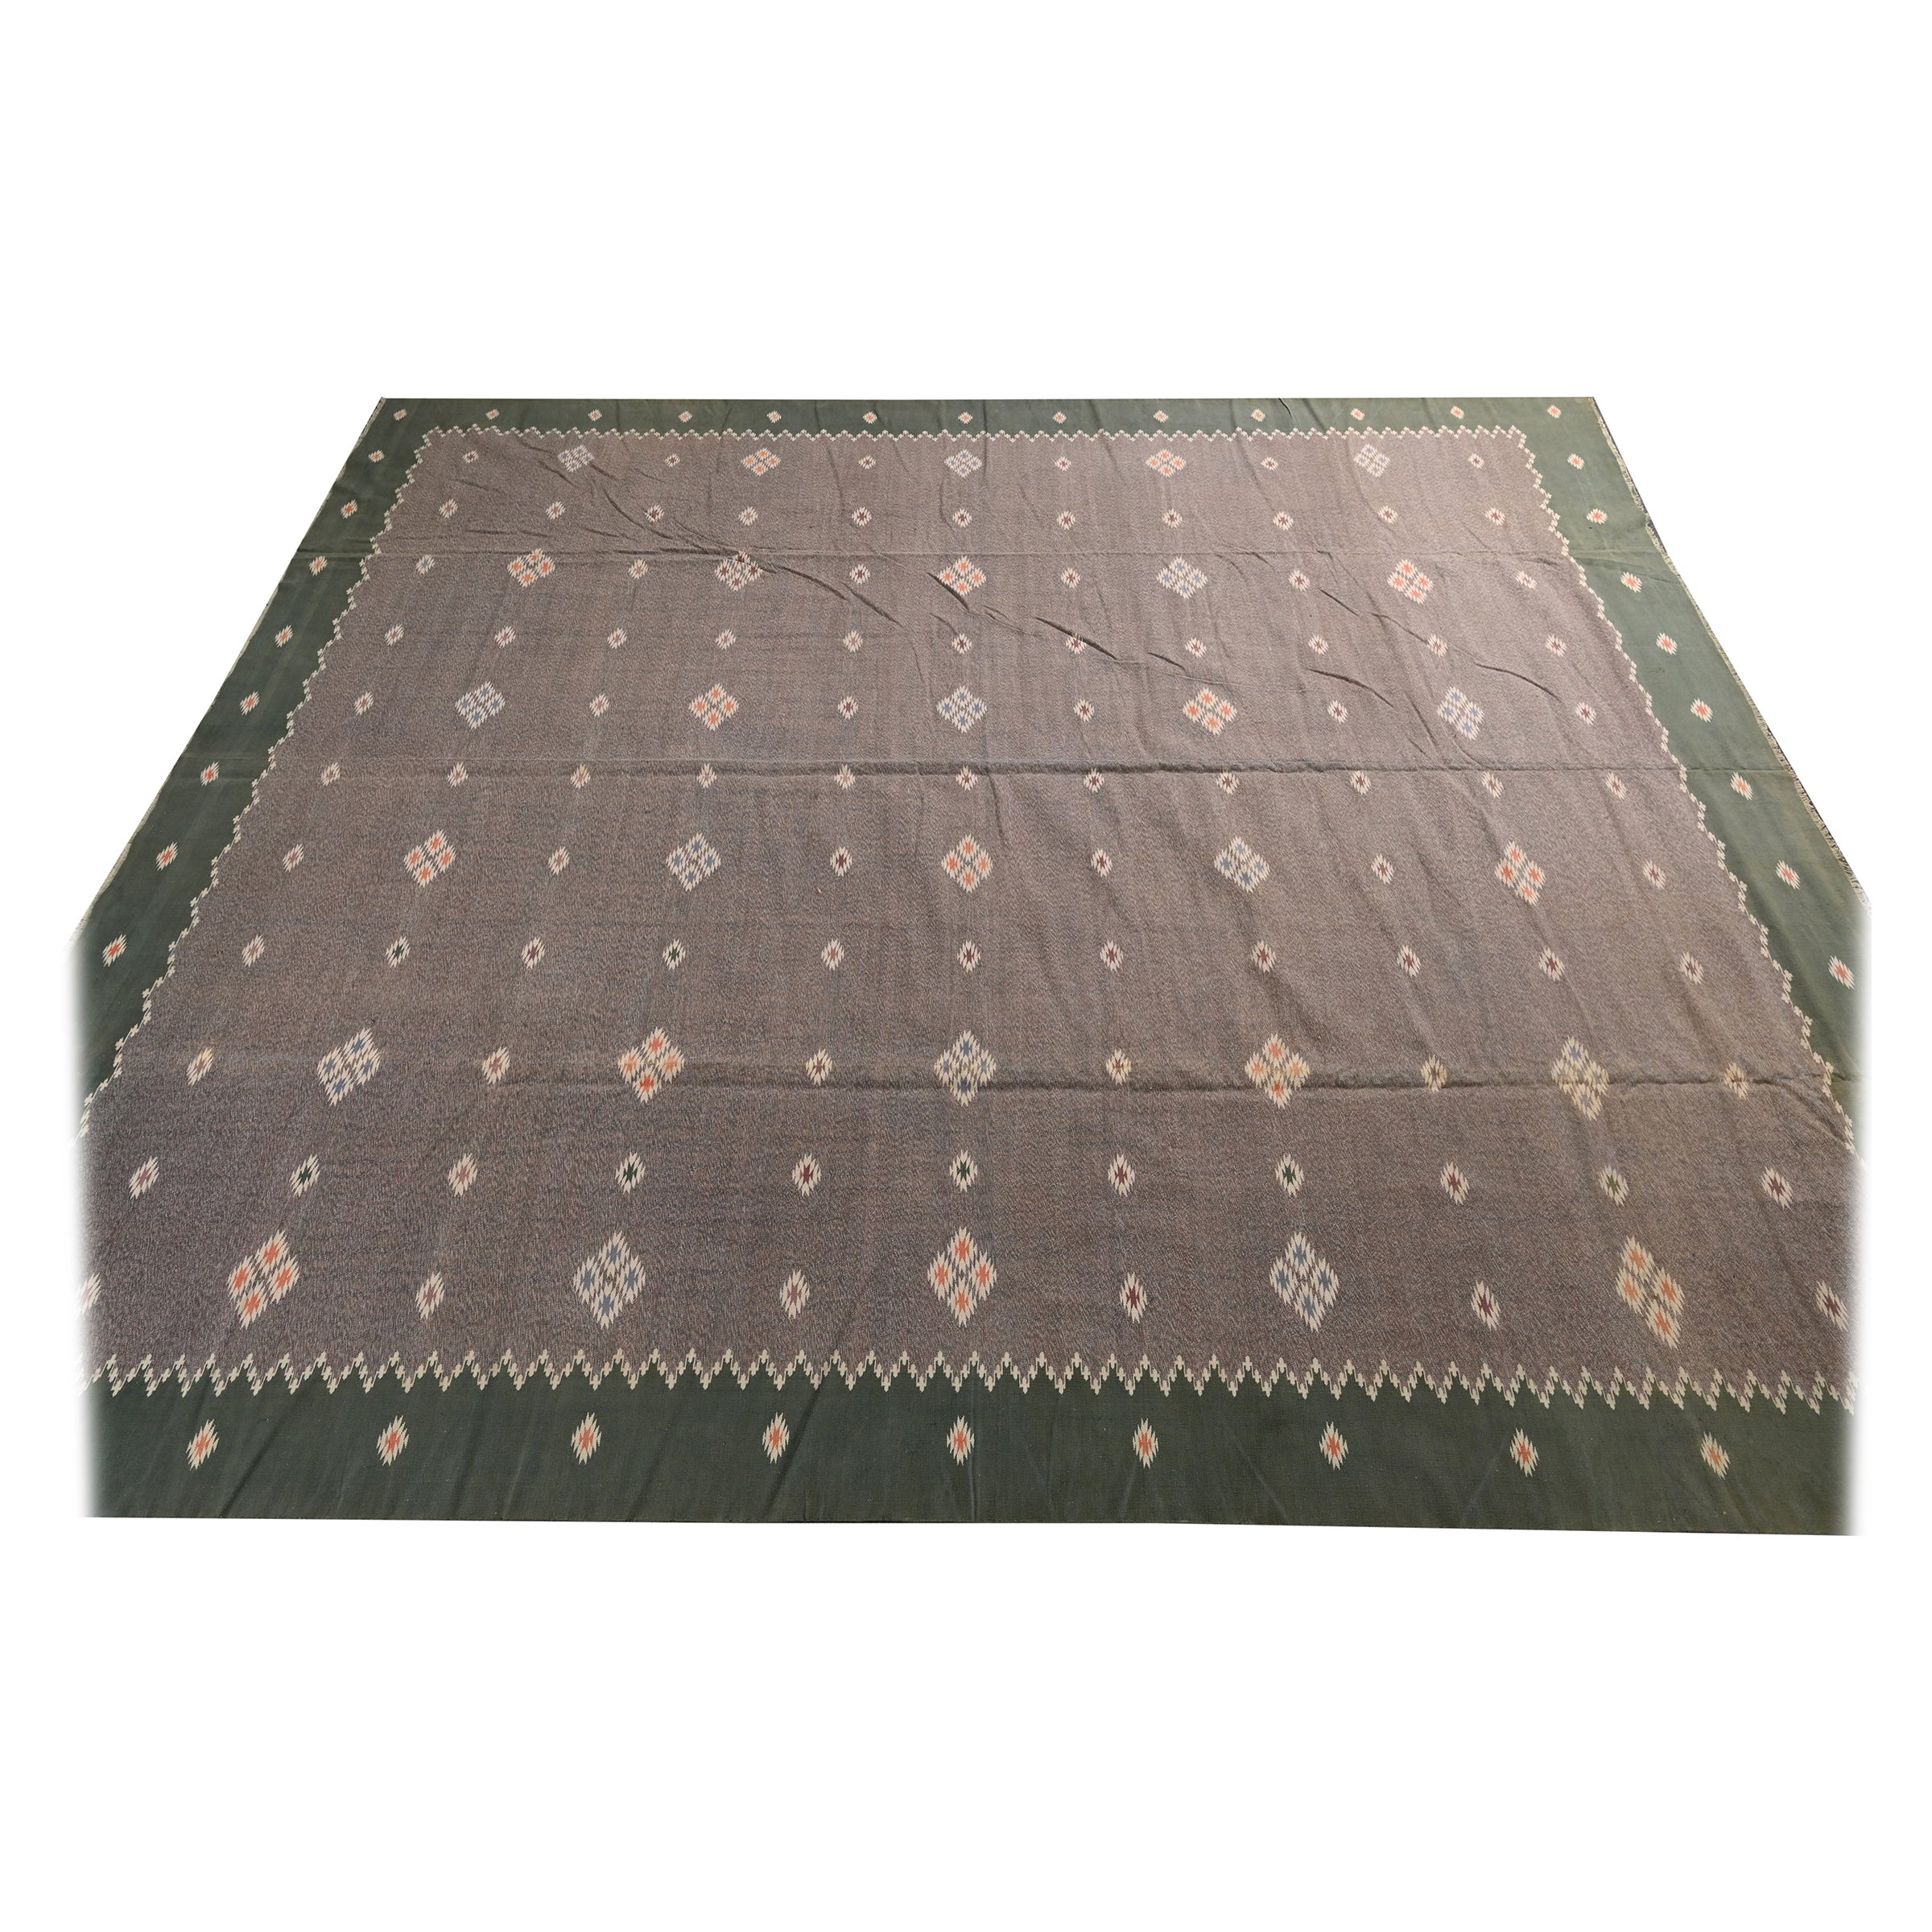 Vintage Dhurrie Flat Weave in Taupe with Geometric Patterns by Rug & Kilim